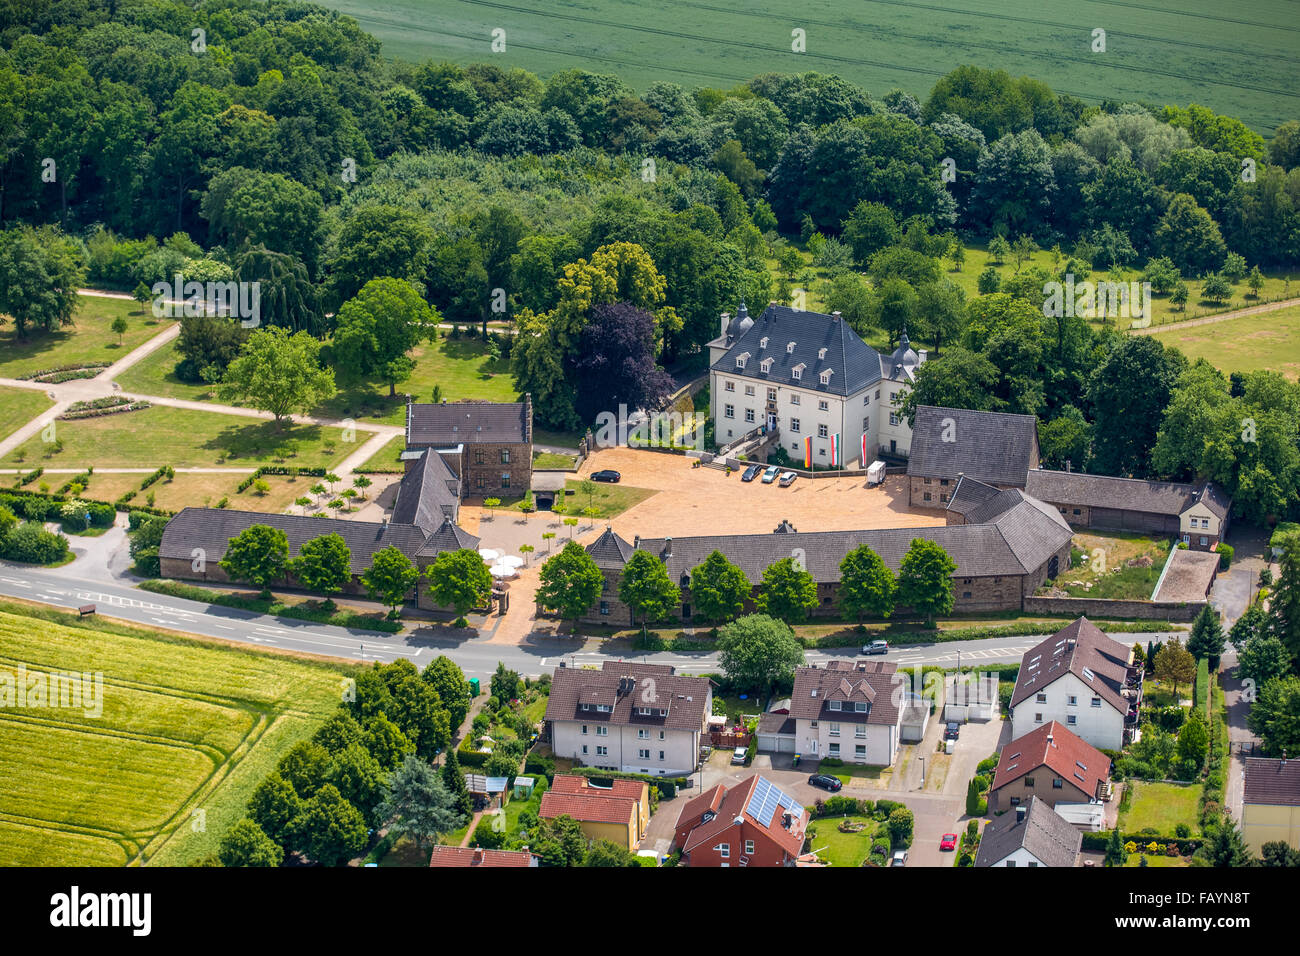 Aerial view, Haus Opherdicke and Landscape Park, Holzwickede, Ruhr area, North Rhine-Westphalia, Germany, Europe, Aerial view, Stock Photo